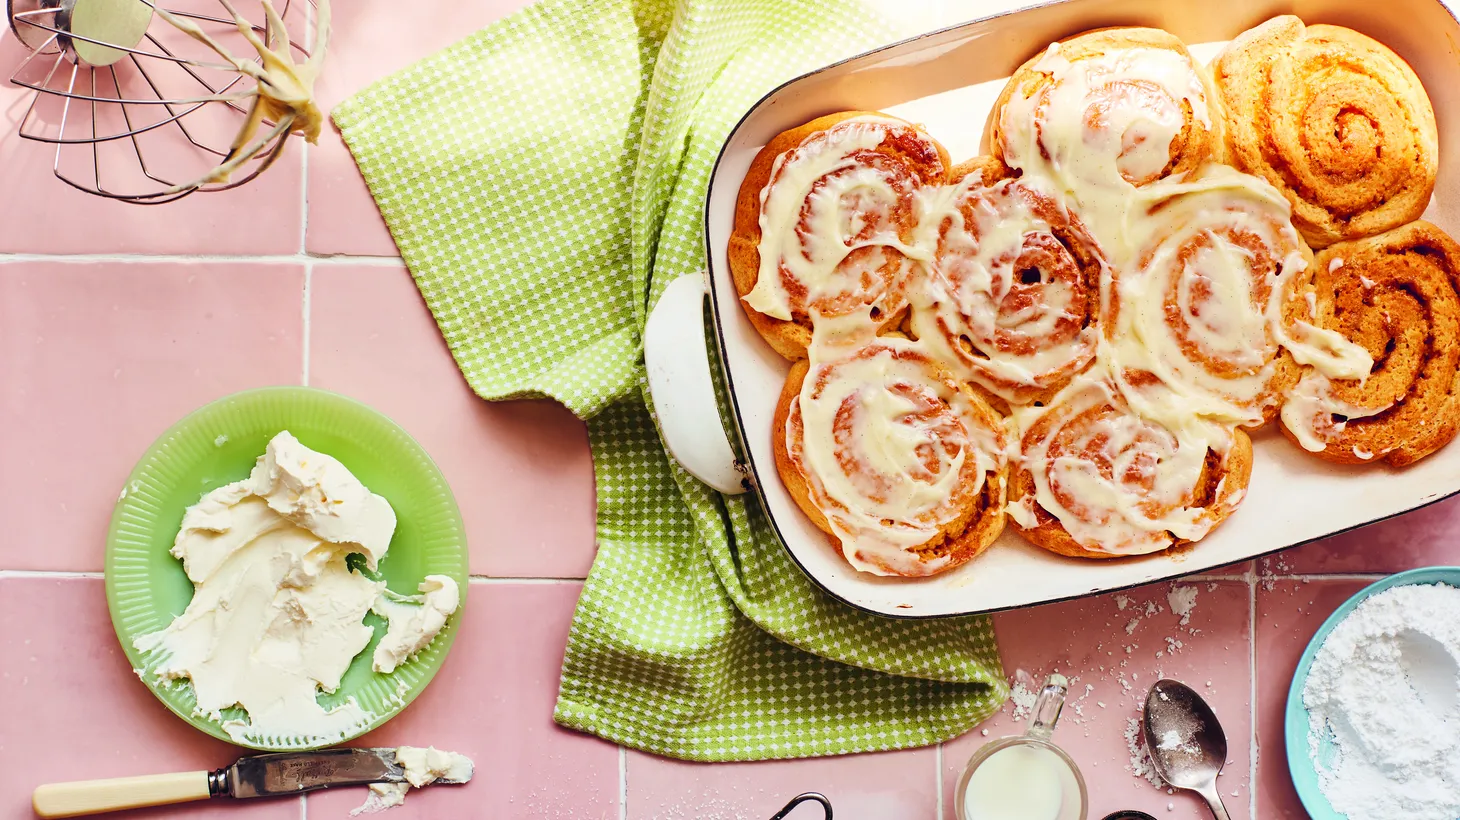 Gluten-free cinnamon buns that actually taste good? Yes, it can be done, says Laura Strange.